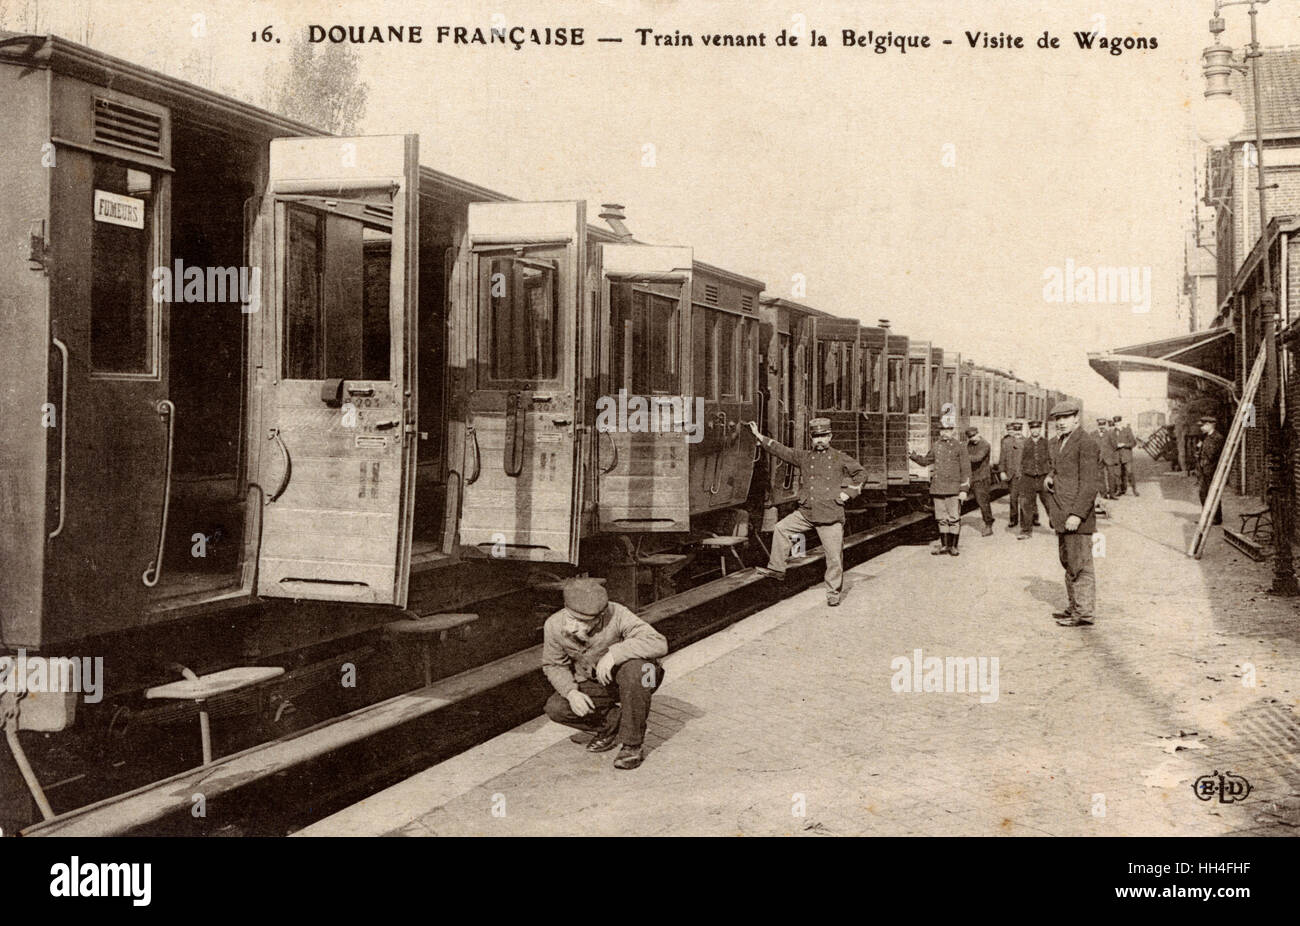 WW1 - Haumont Station, France - French Customs officials Stock Photo